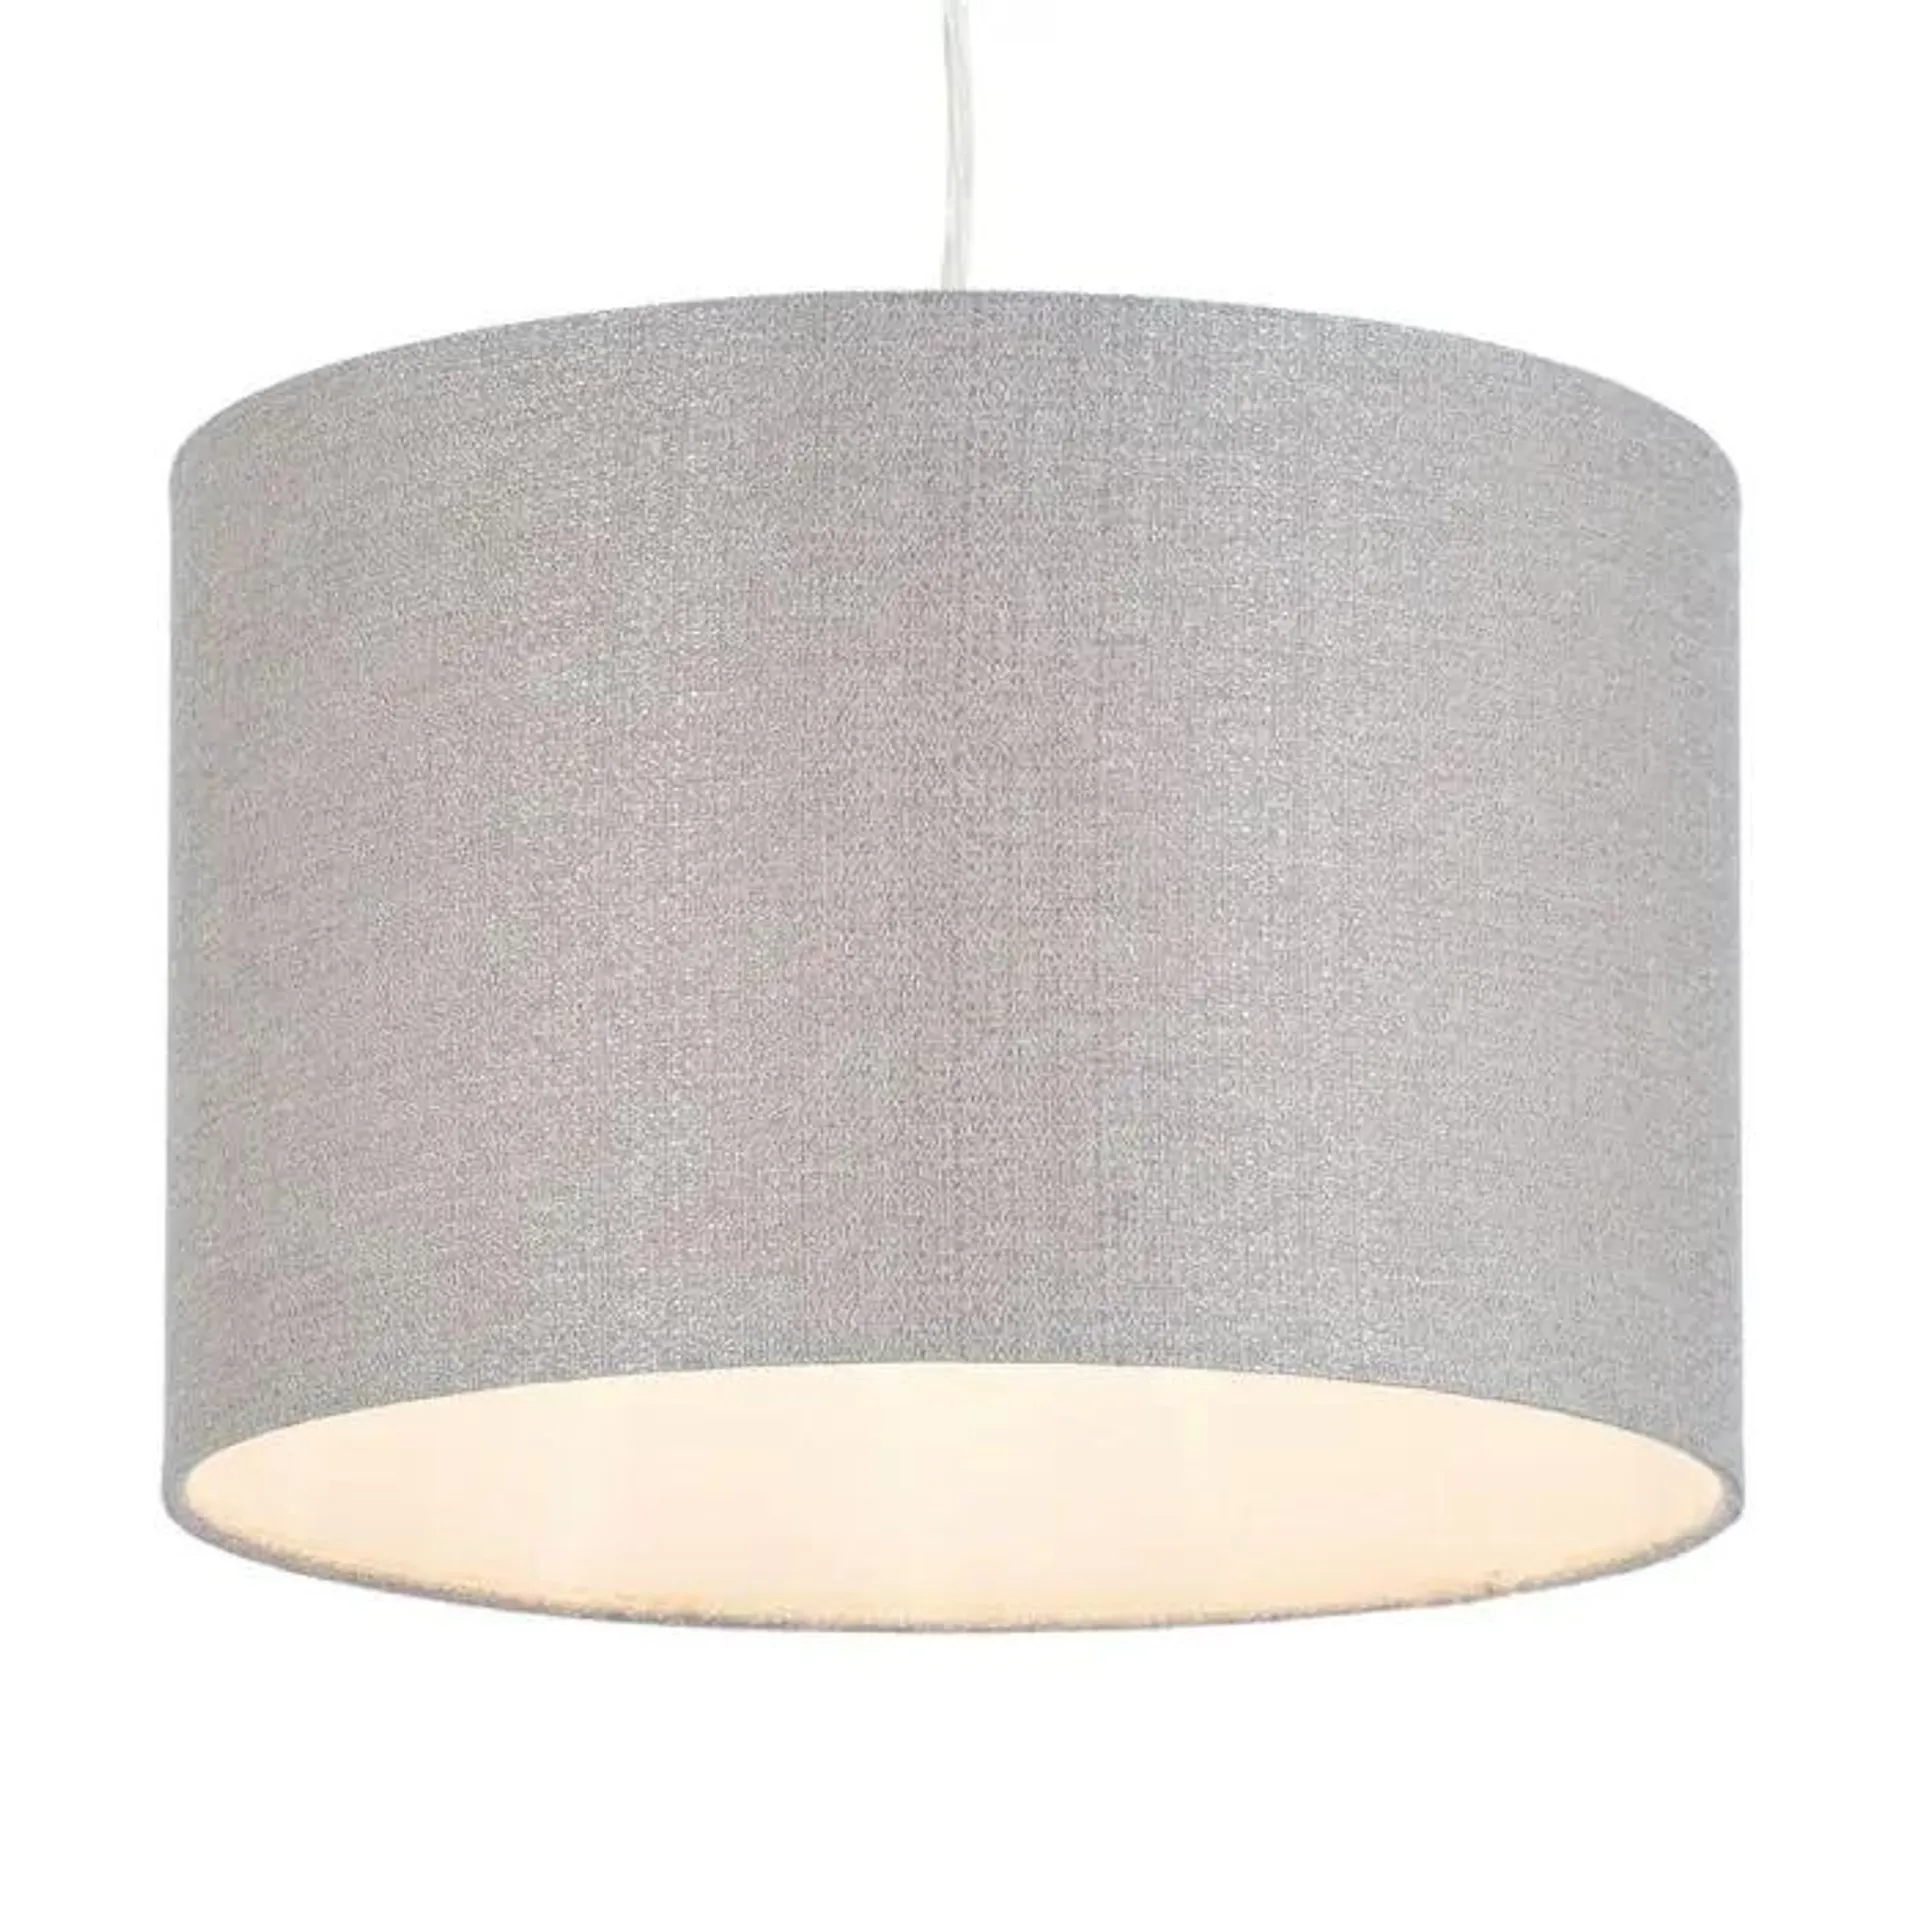 Potter Textured Easyfit Shade, Silver